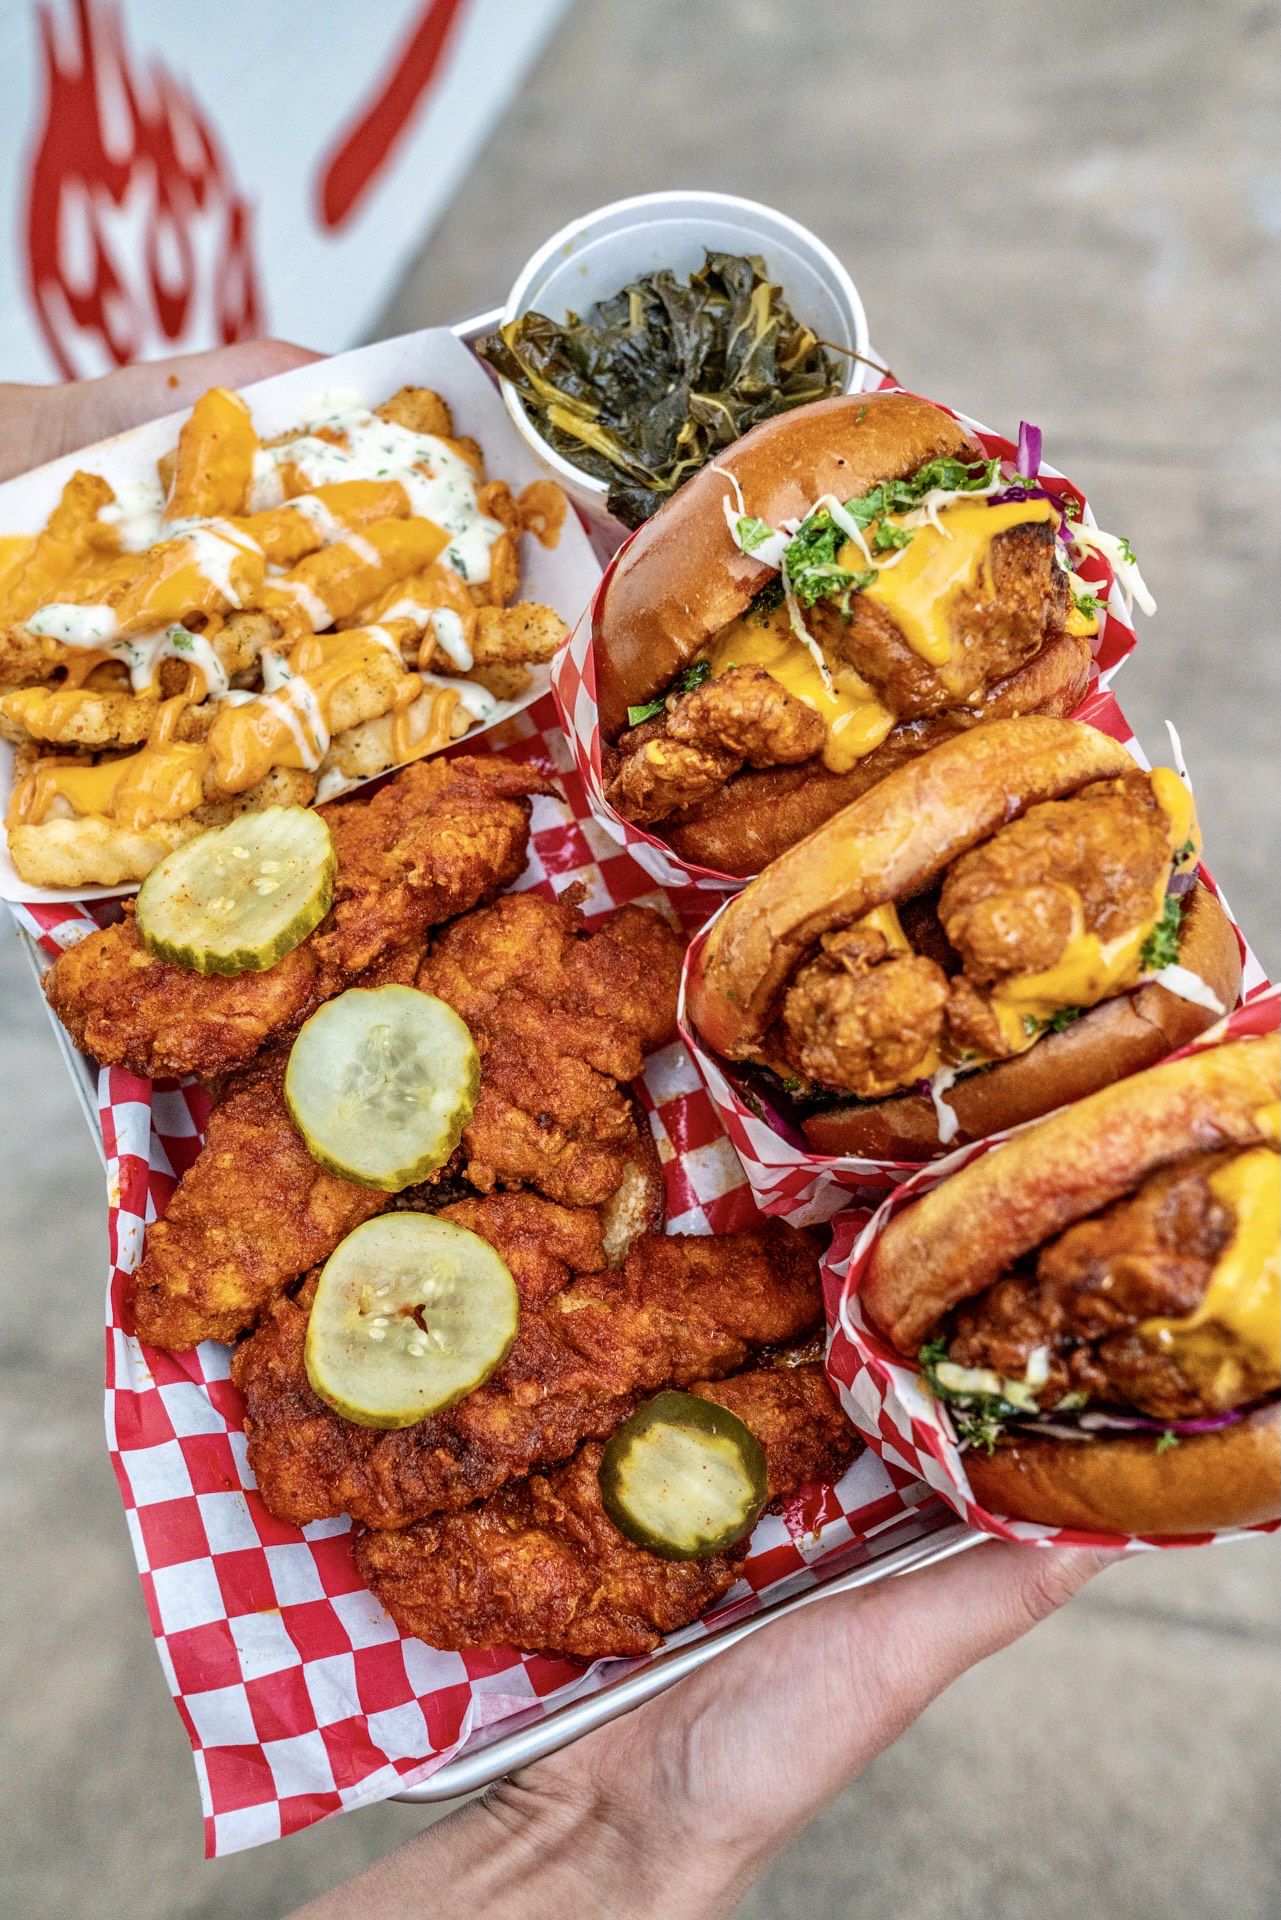 Lucky's Hot Chicken has a short menu of fried chicken, both hot and not. The second Lucky's opens in Dallas, across the street from SMU, in April 2021.